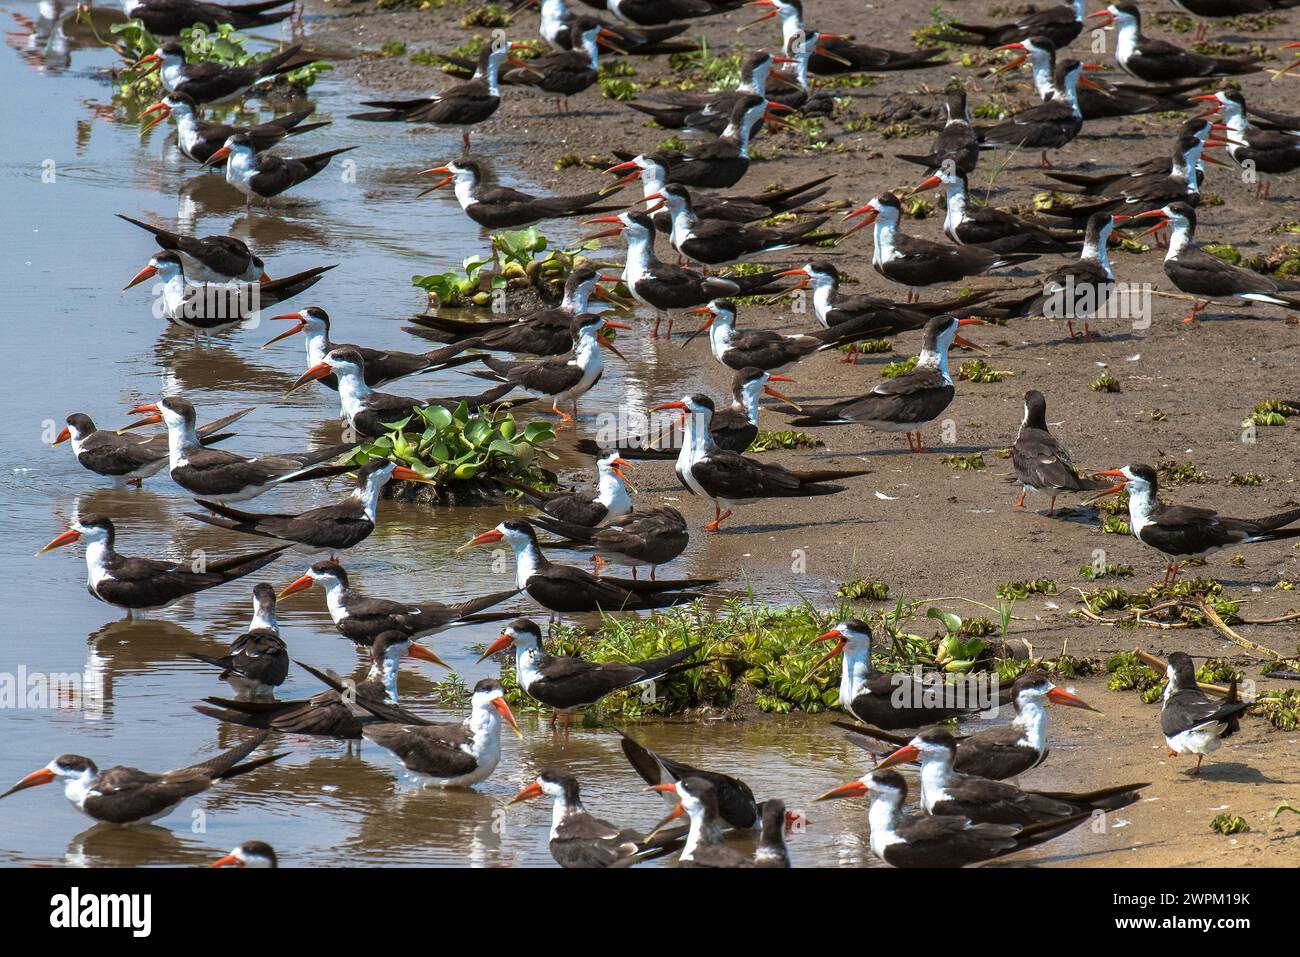 African skimmers along the Nile River, Murchison Falls National Park, Uganda, East Africa, Africa Stock Photo